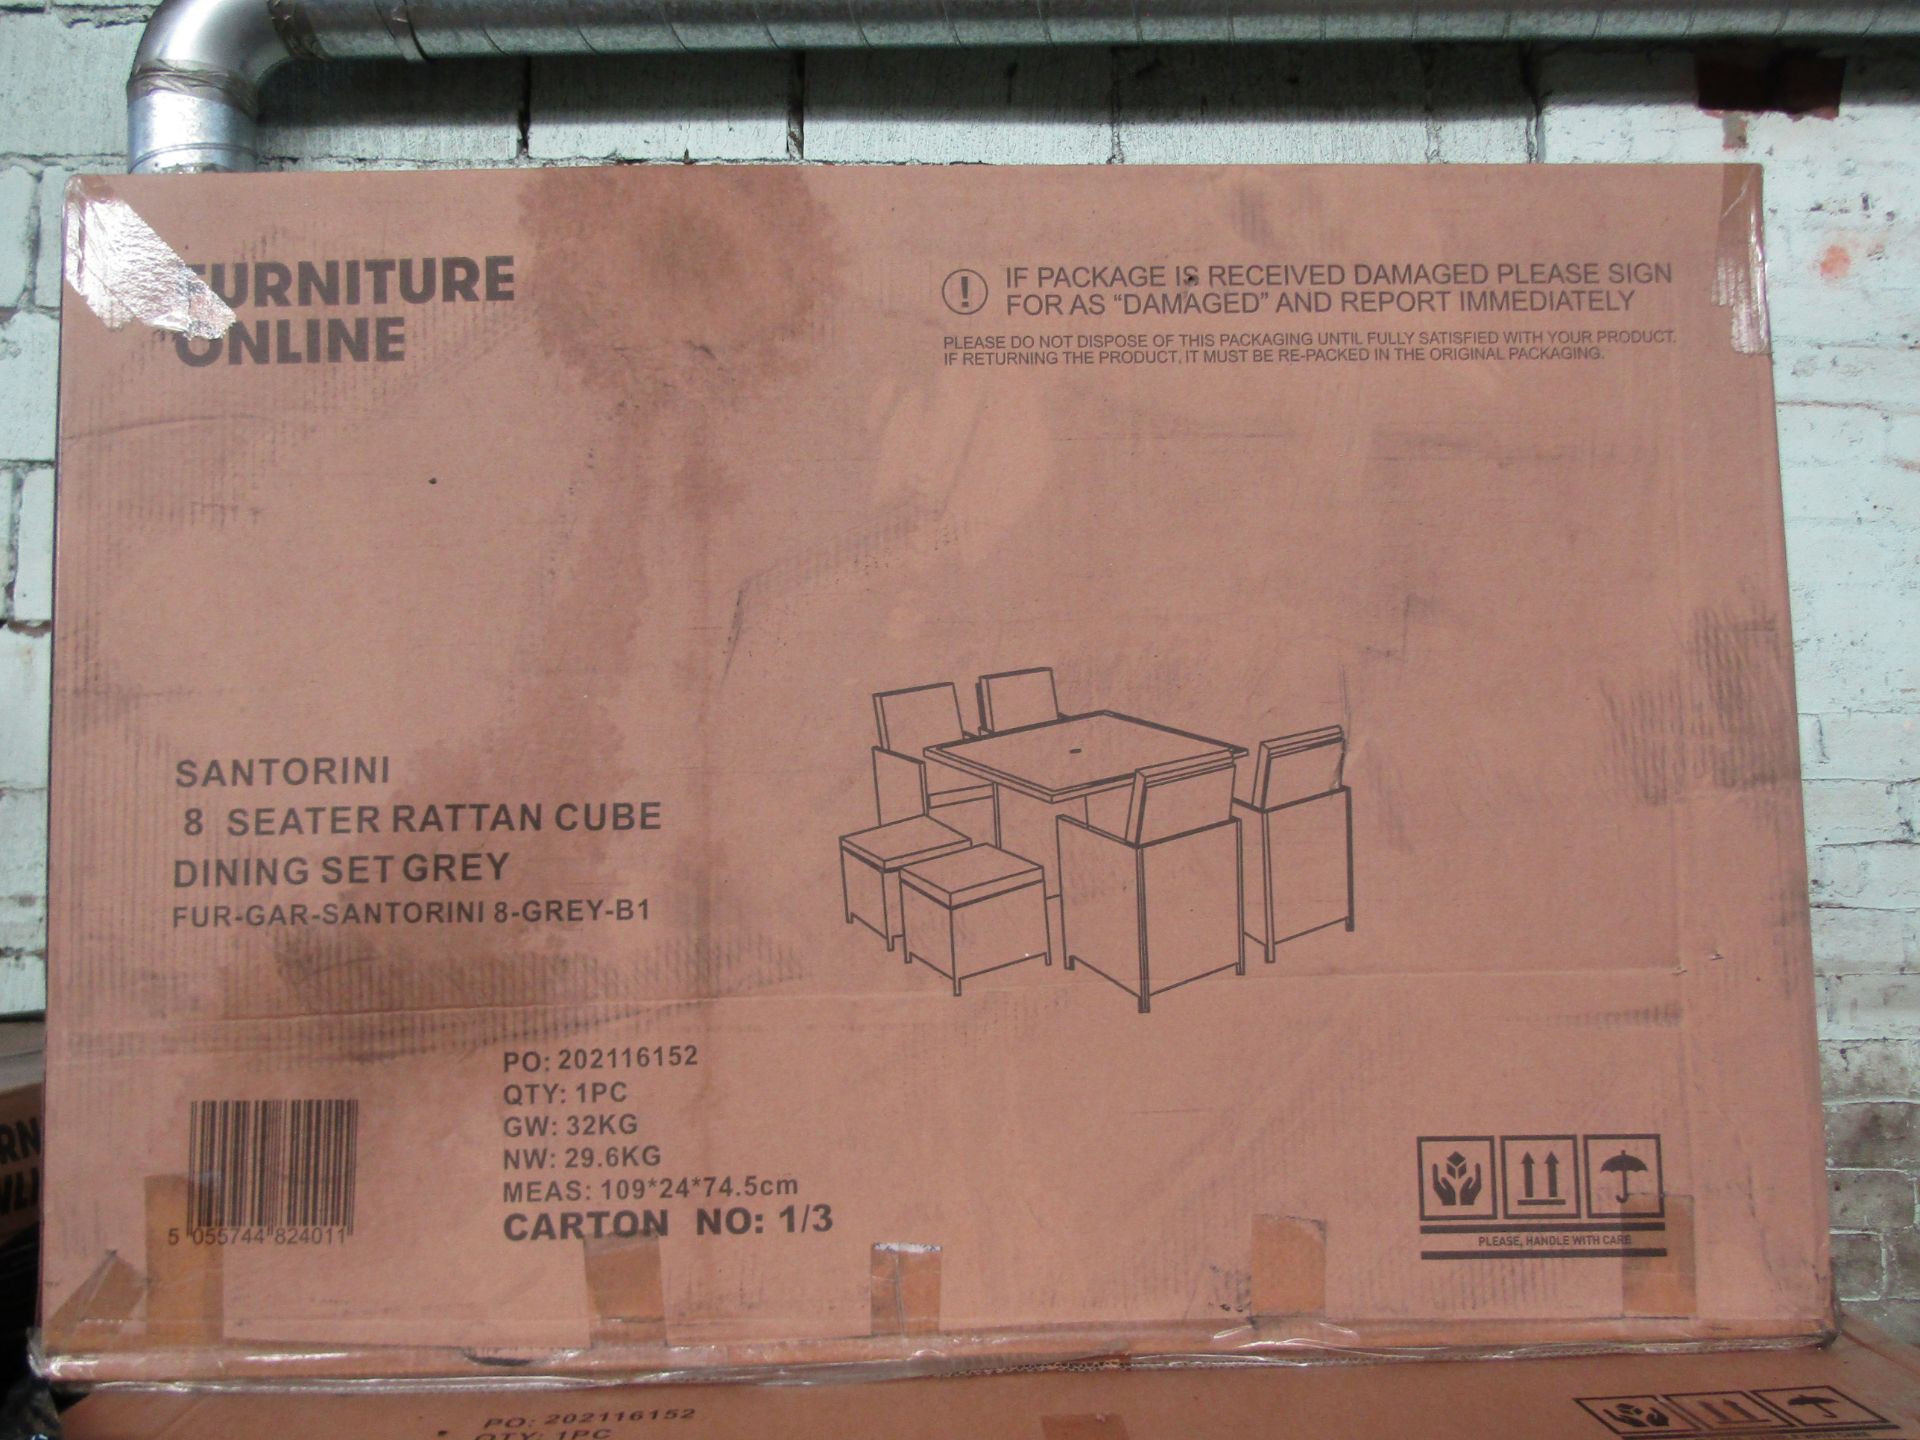 2 x Furniture Online Ex-Retail Customer Returns Mixed Lot - Total RRP est. 866This lot features a